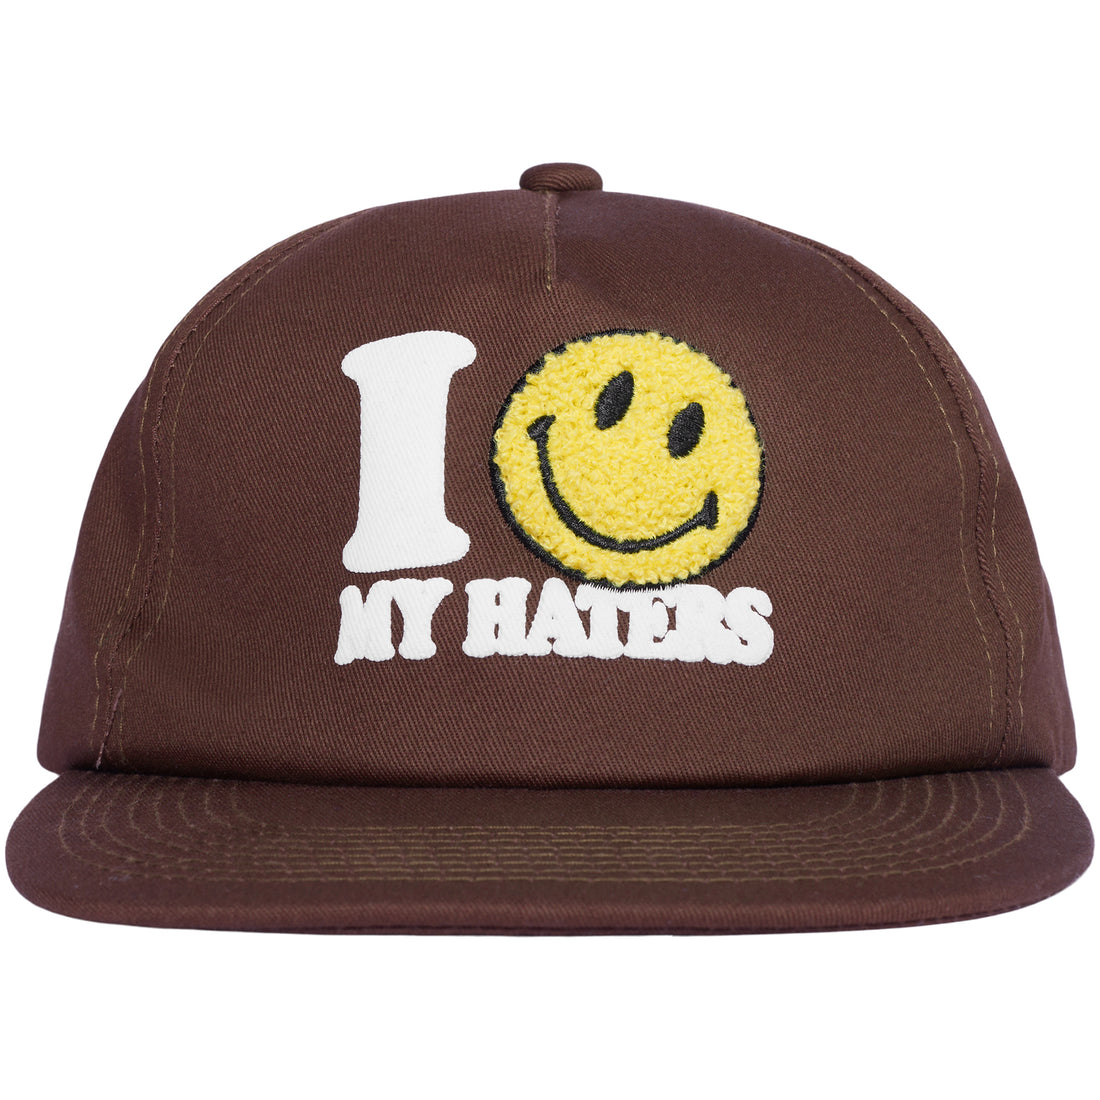 chinatown smiley haters 5 panel hat